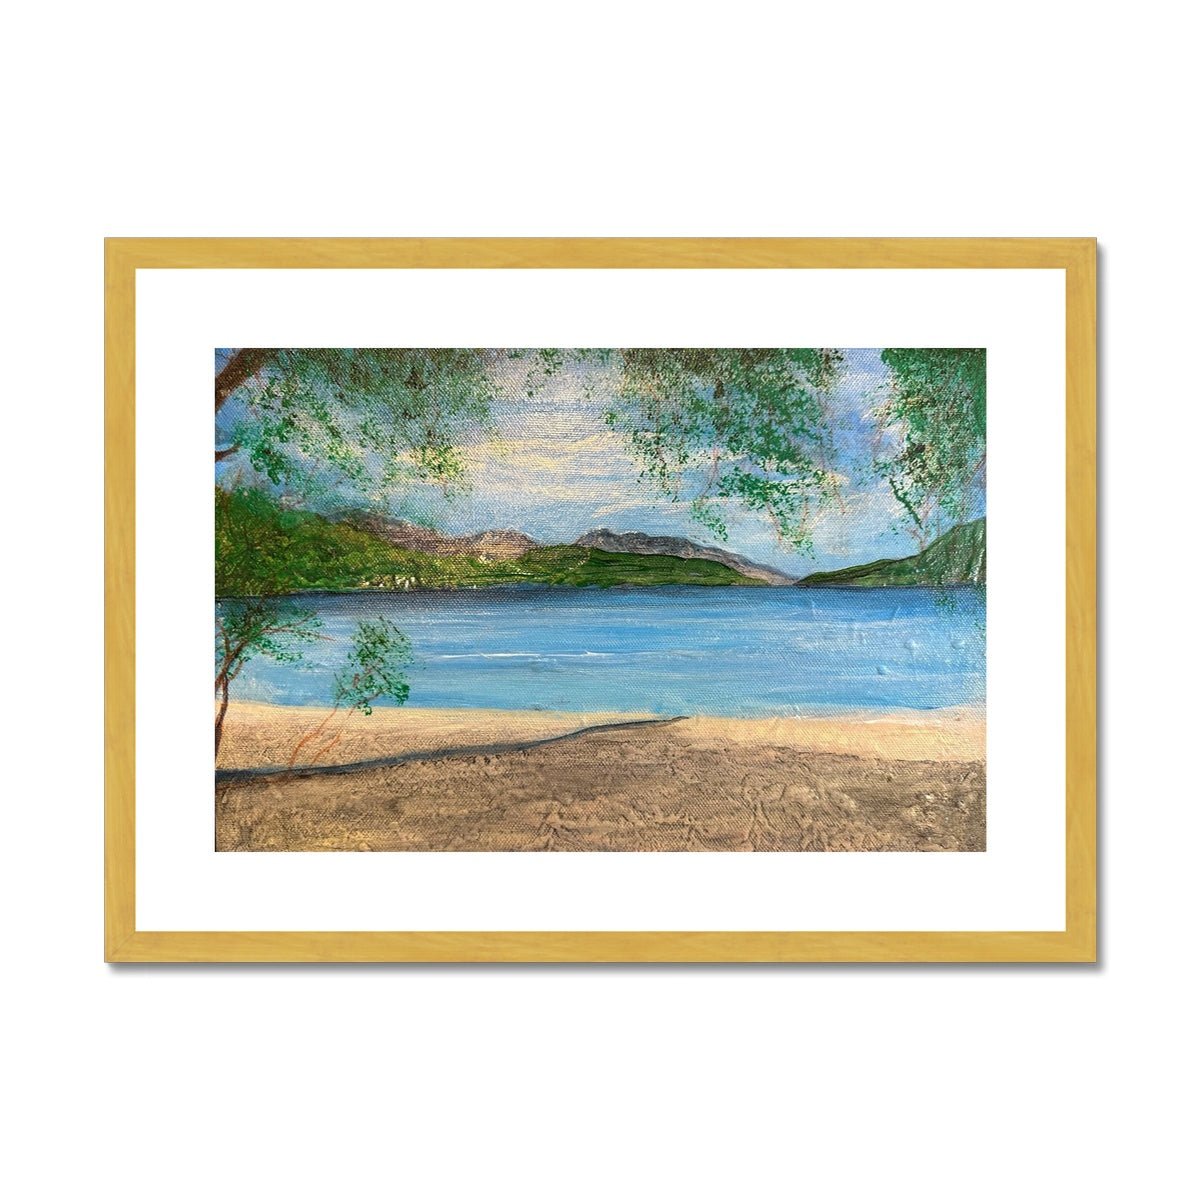 Firkin Point Loch Lomond Painting | Antique Framed & Mounted Prints From Scotland-Antique Framed & Mounted Prints-Scottish Lochs & Mountains Art Gallery-A2 Landscape-Gold Frame-Paintings, Prints, Homeware, Art Gifts From Scotland By Scottish Artist Kevin Hunter